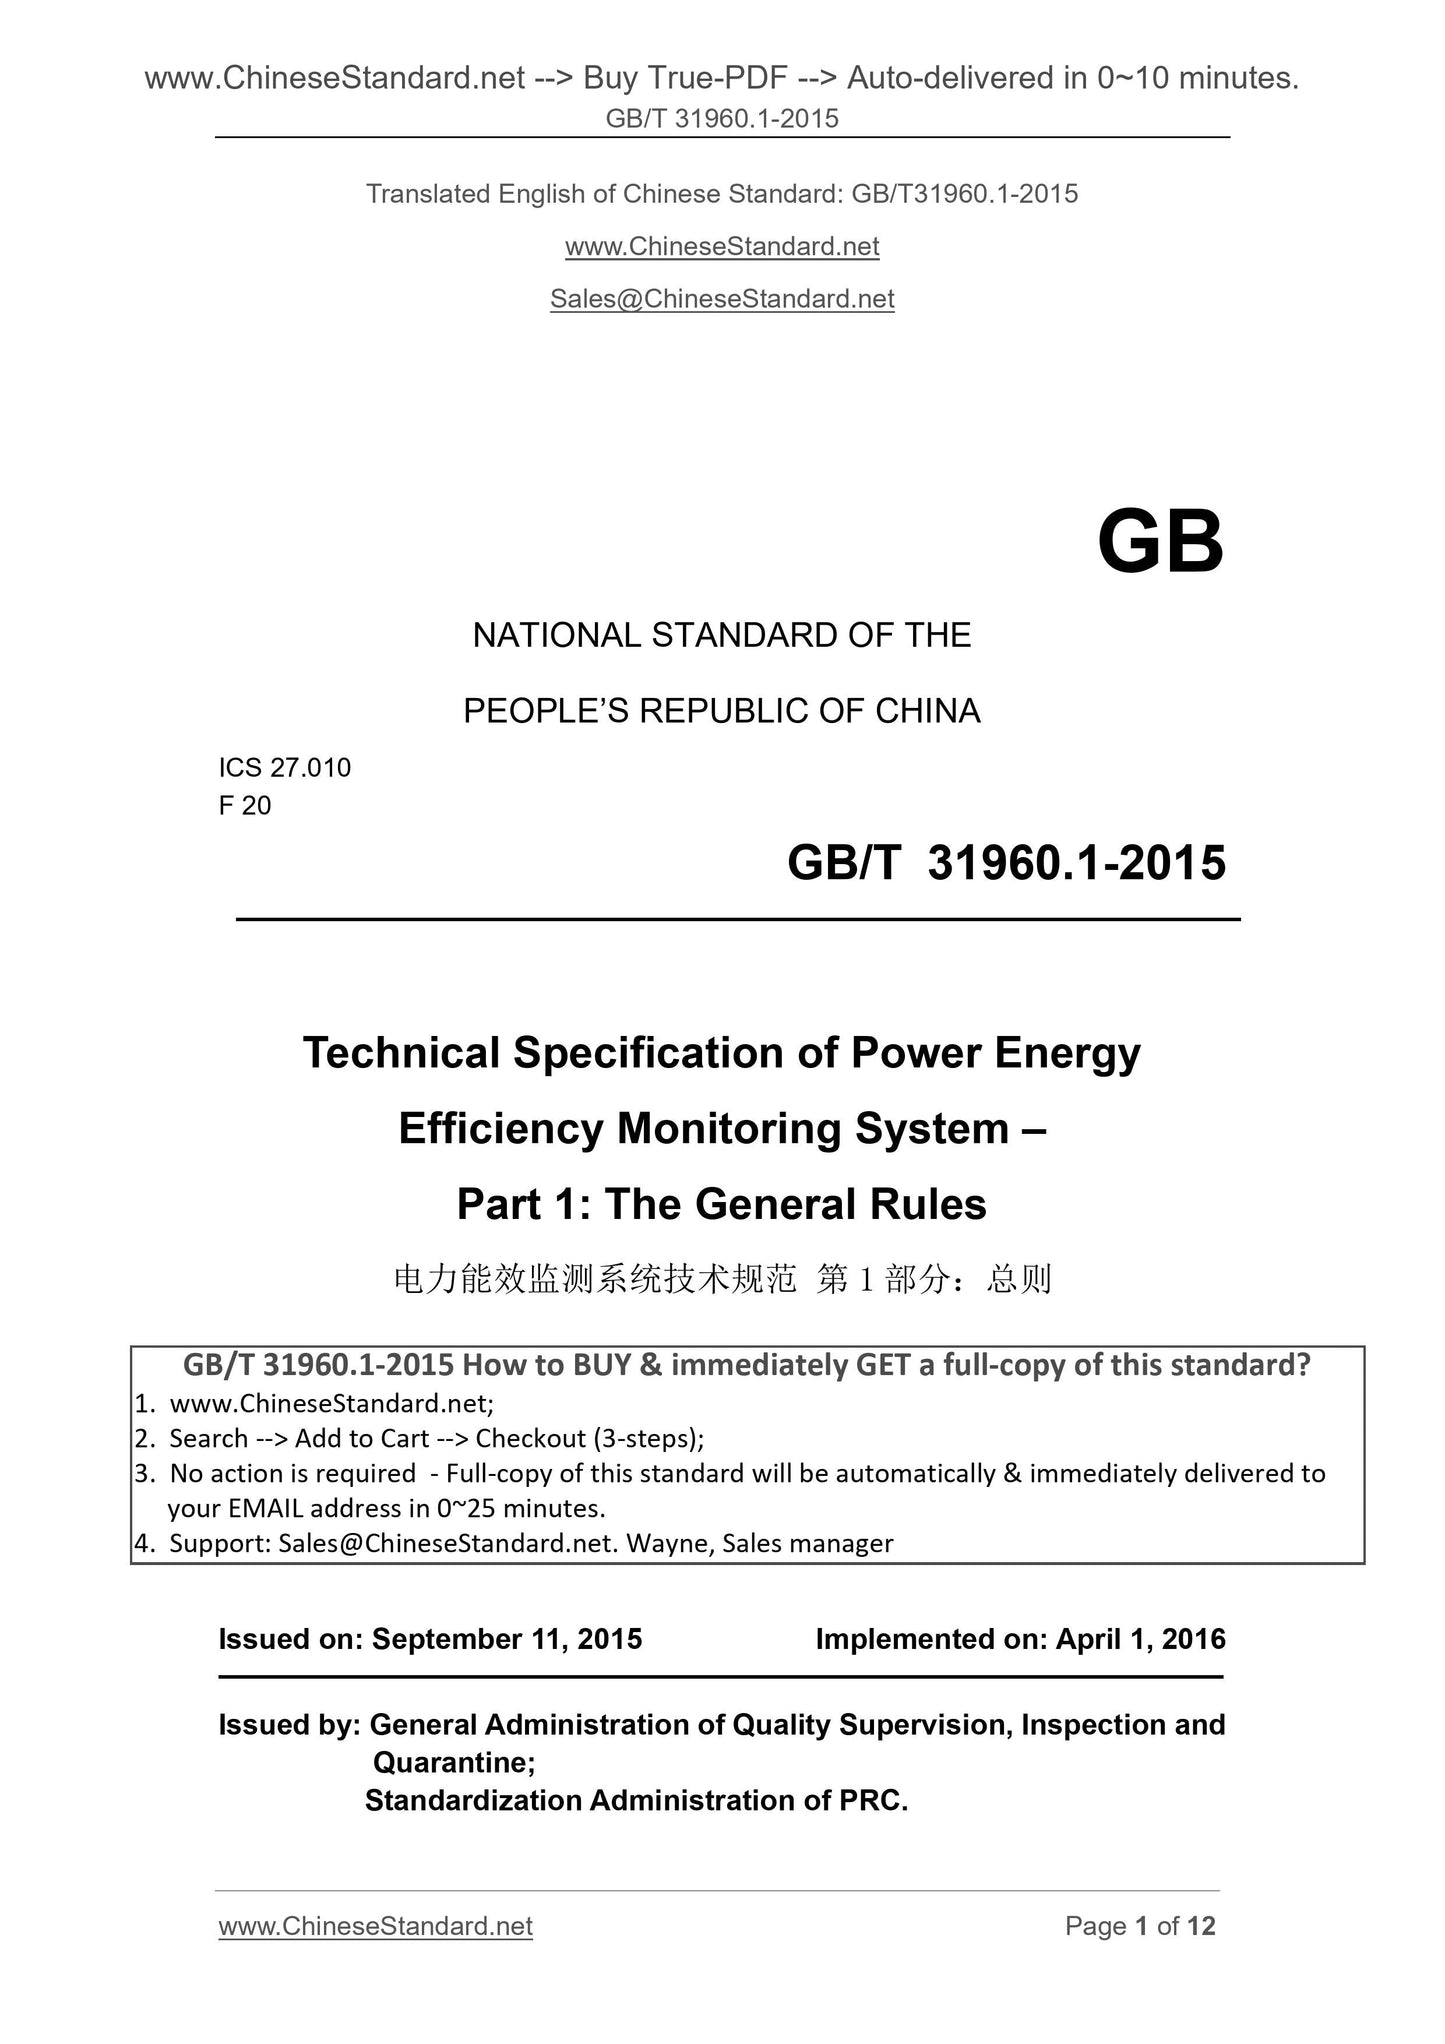 GB/T 31960.1-2015 Page 1